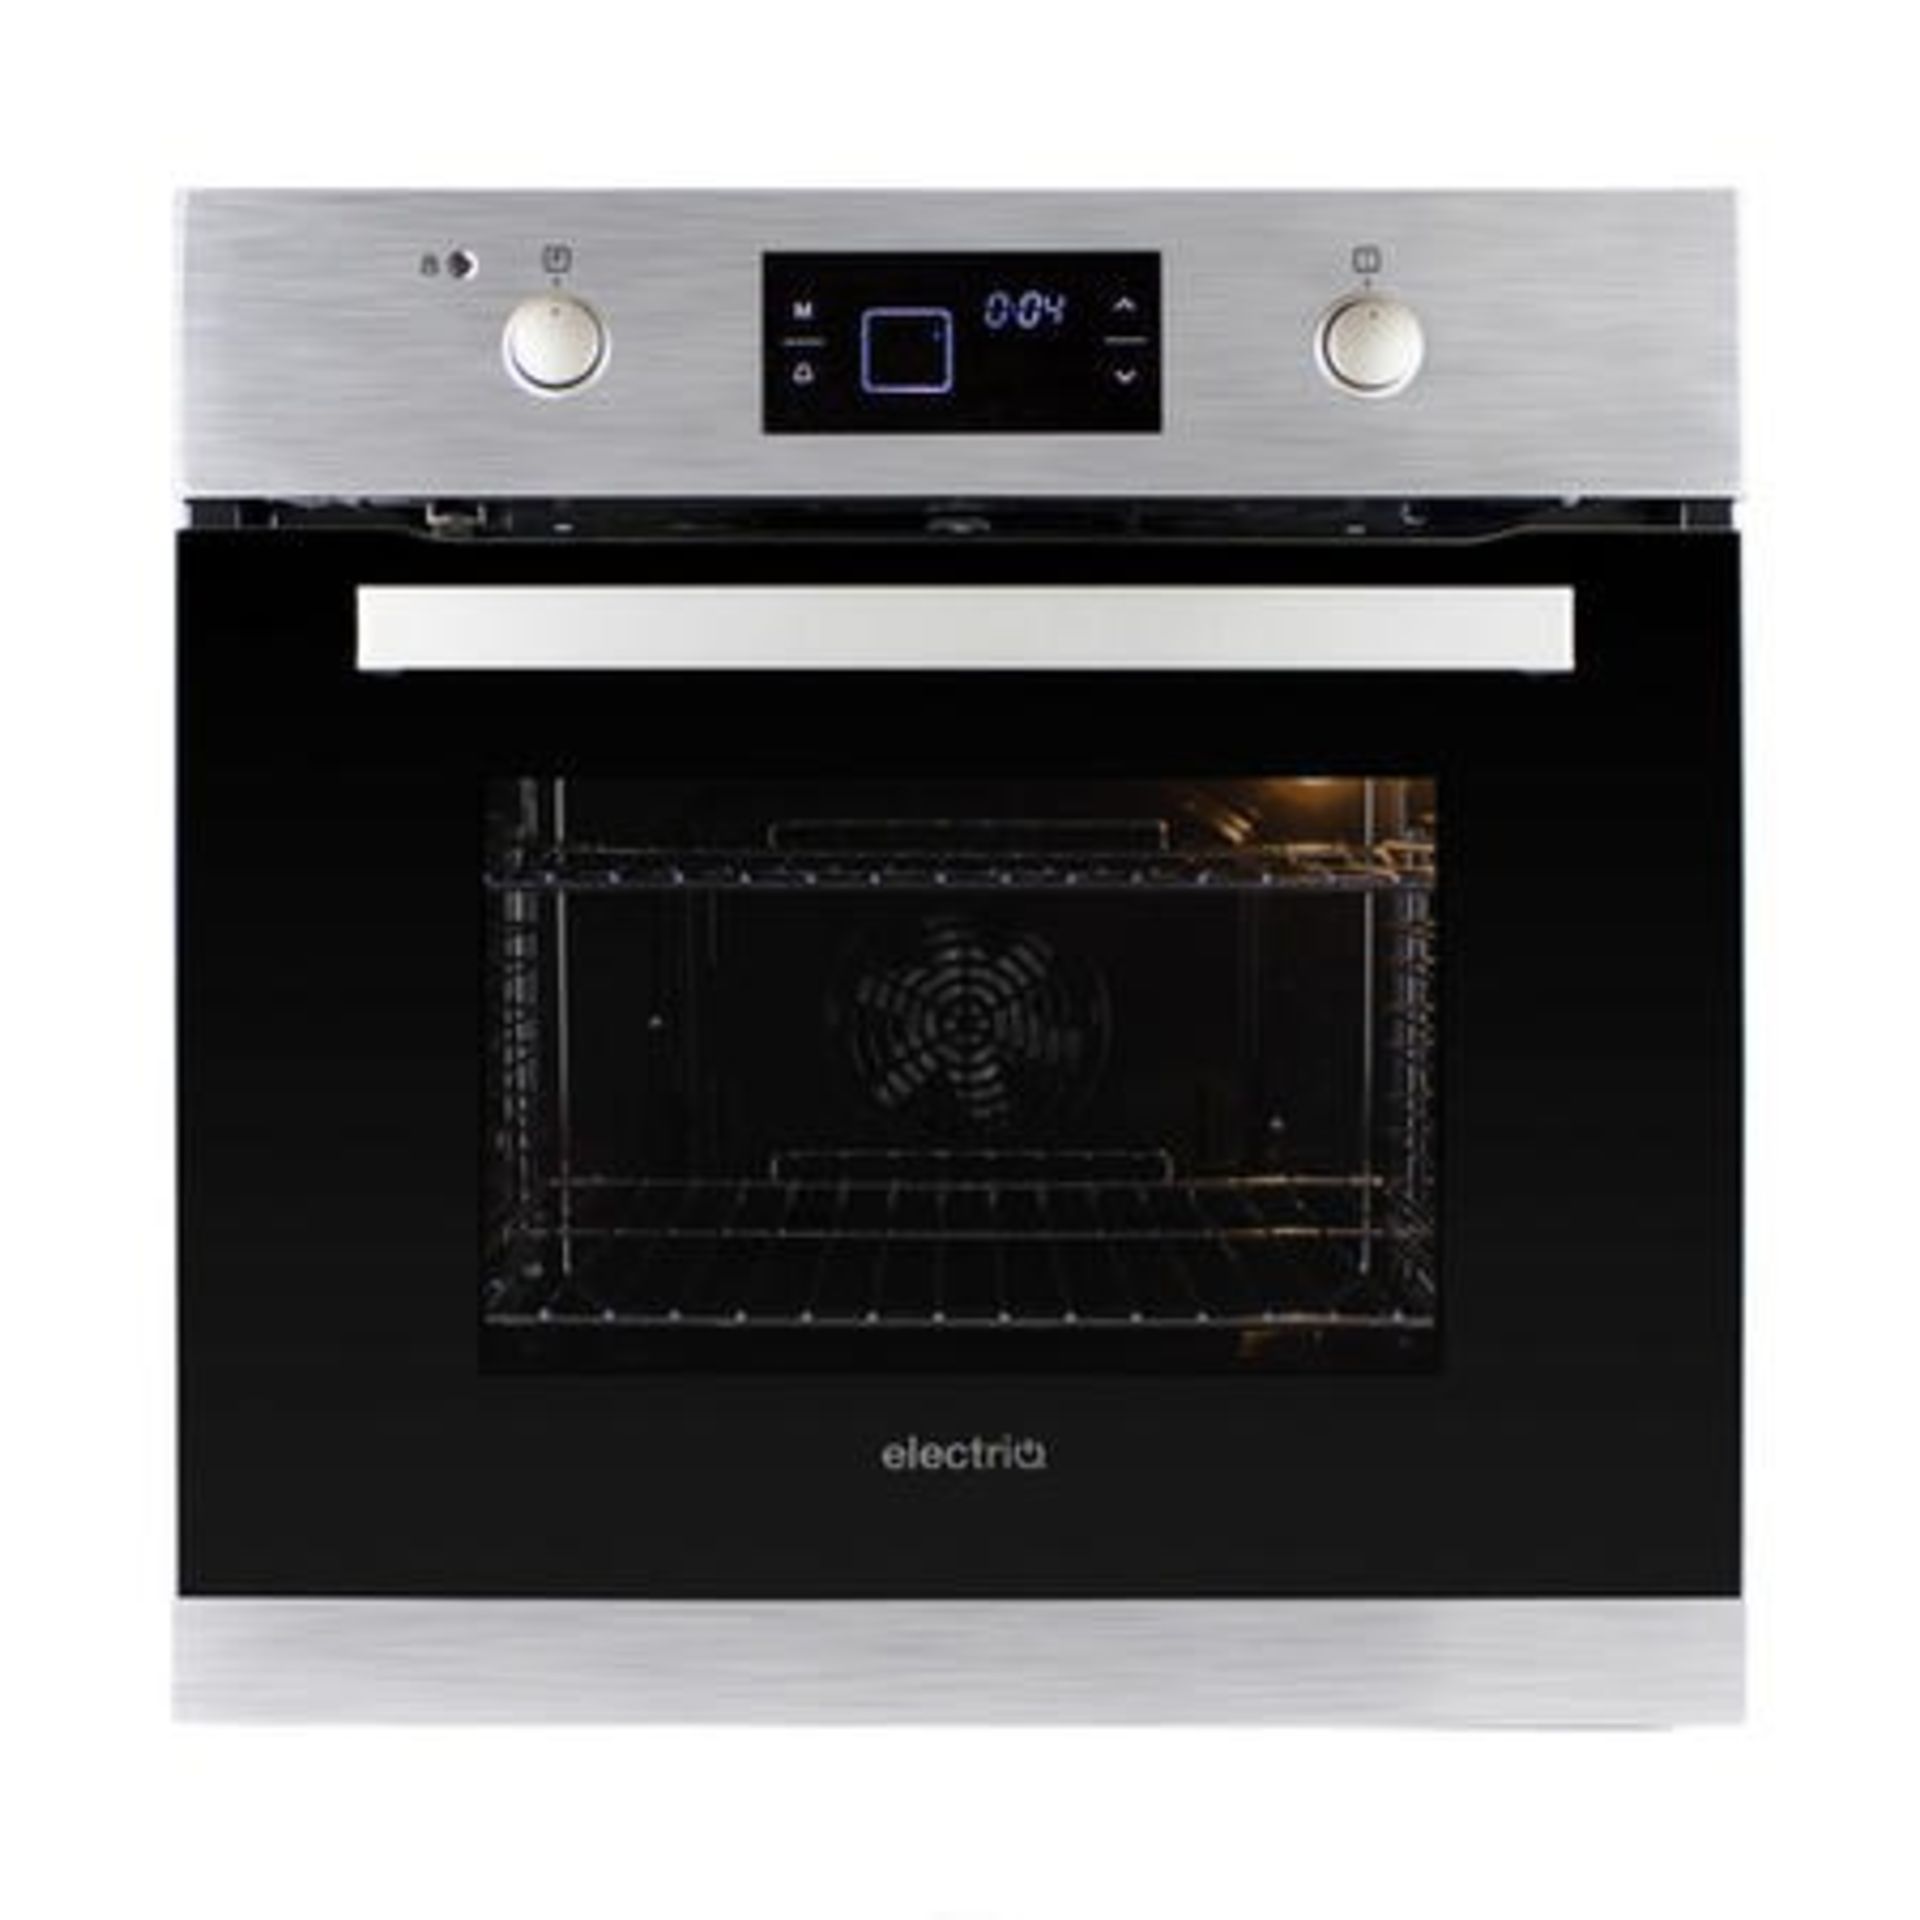 1 BOXED ELECTRIQ 68L PYROLYTICSELF CLEANING ELECTRIC SINGLE OVEN IN STAINLESS STEEL / RRP £239.97 (